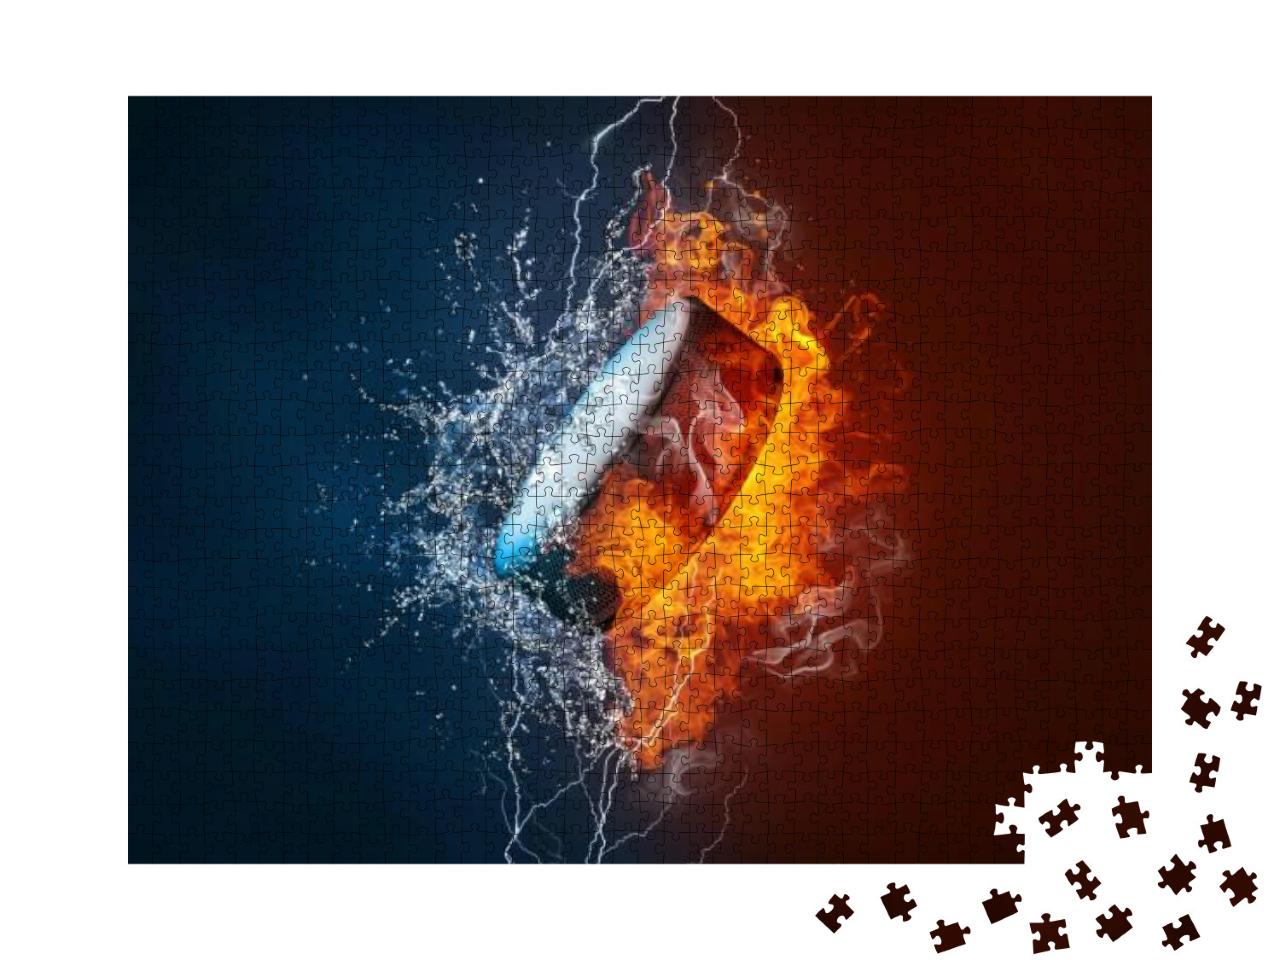 Ice Hockey Puck Exploding by Elements Fire & Water. Backg... Jigsaw Puzzle with 1000 pieces